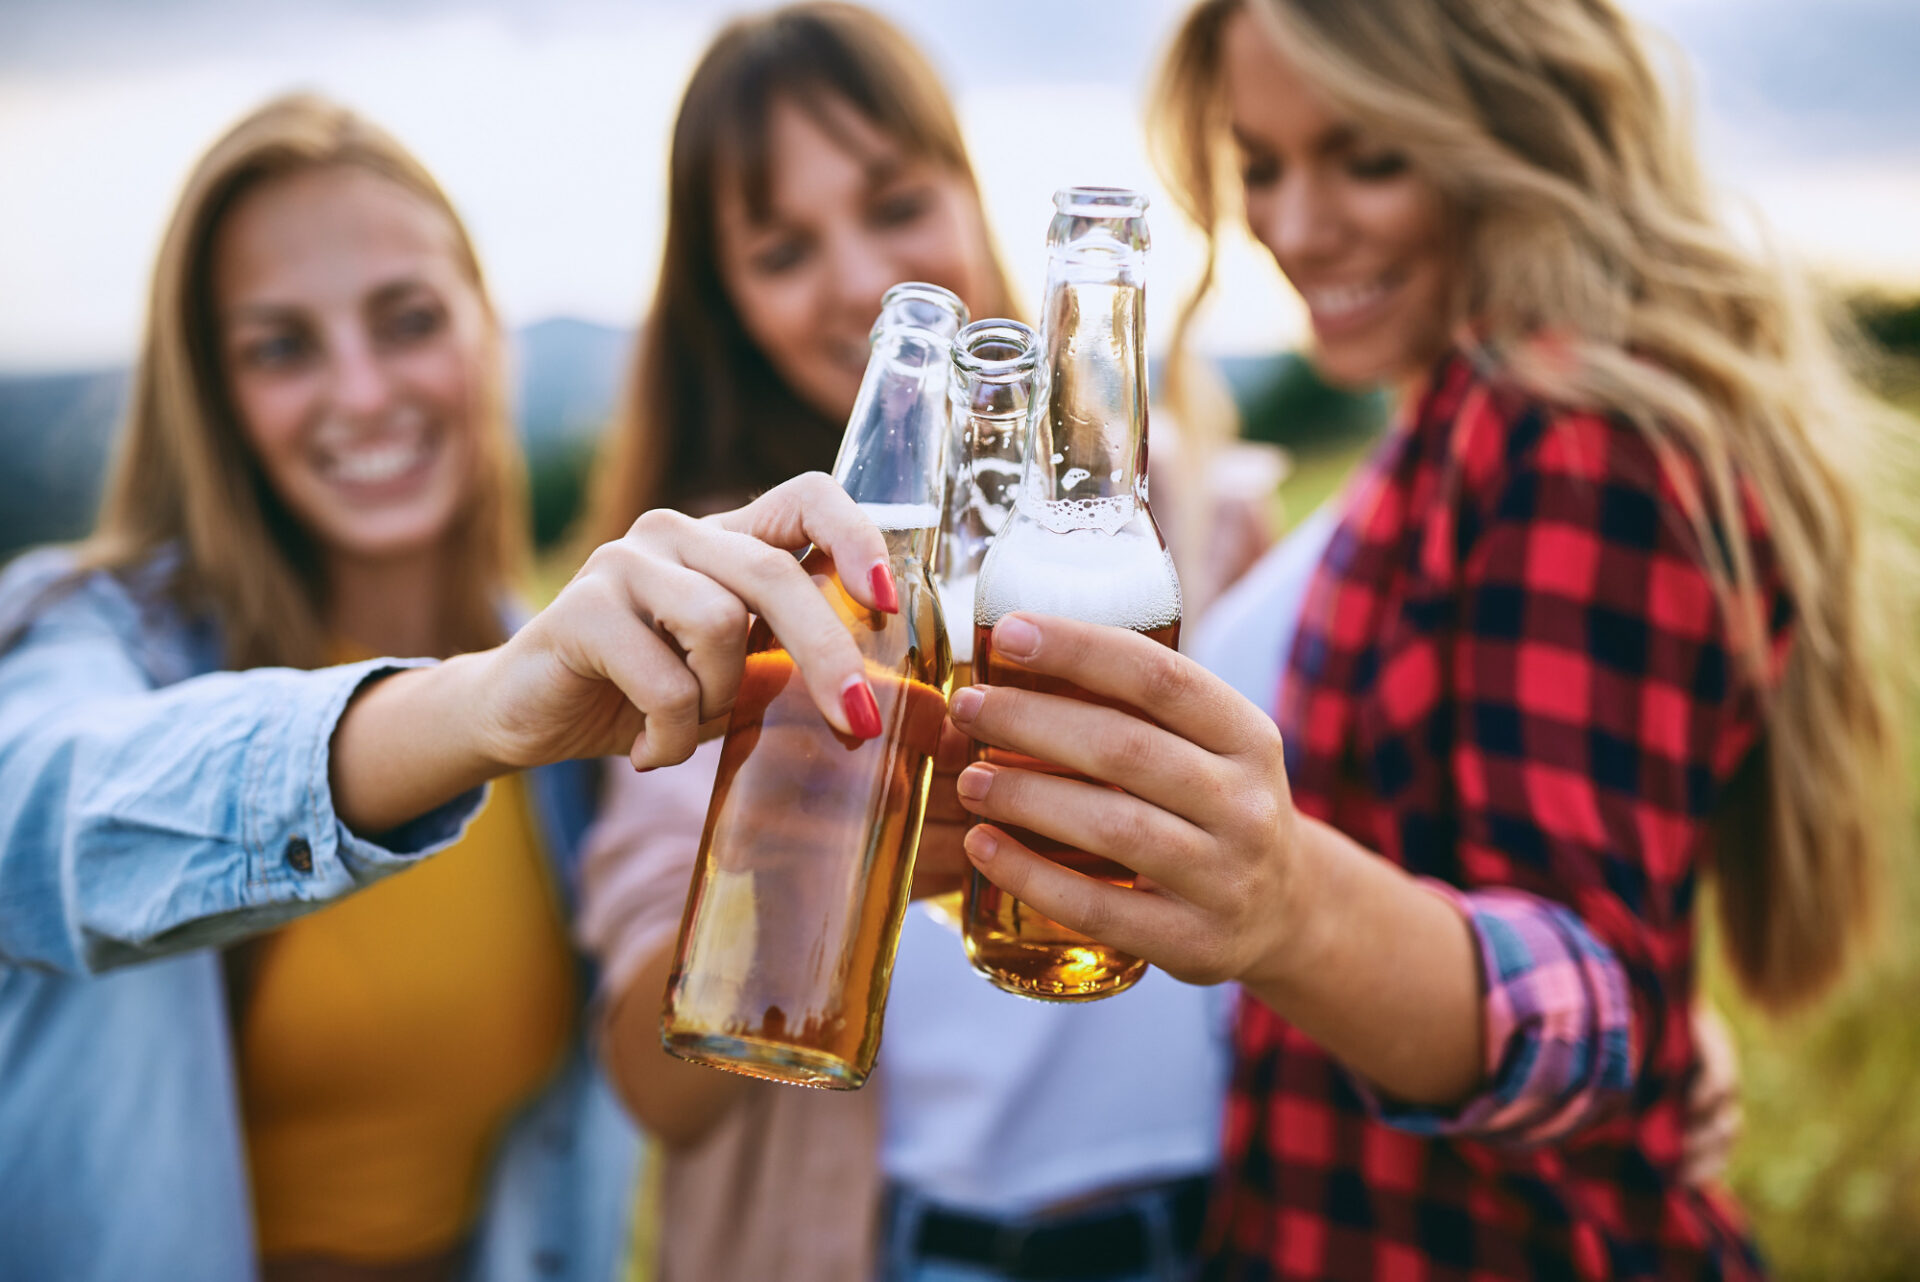 Is Drinking Alcohol the New Smoking? 